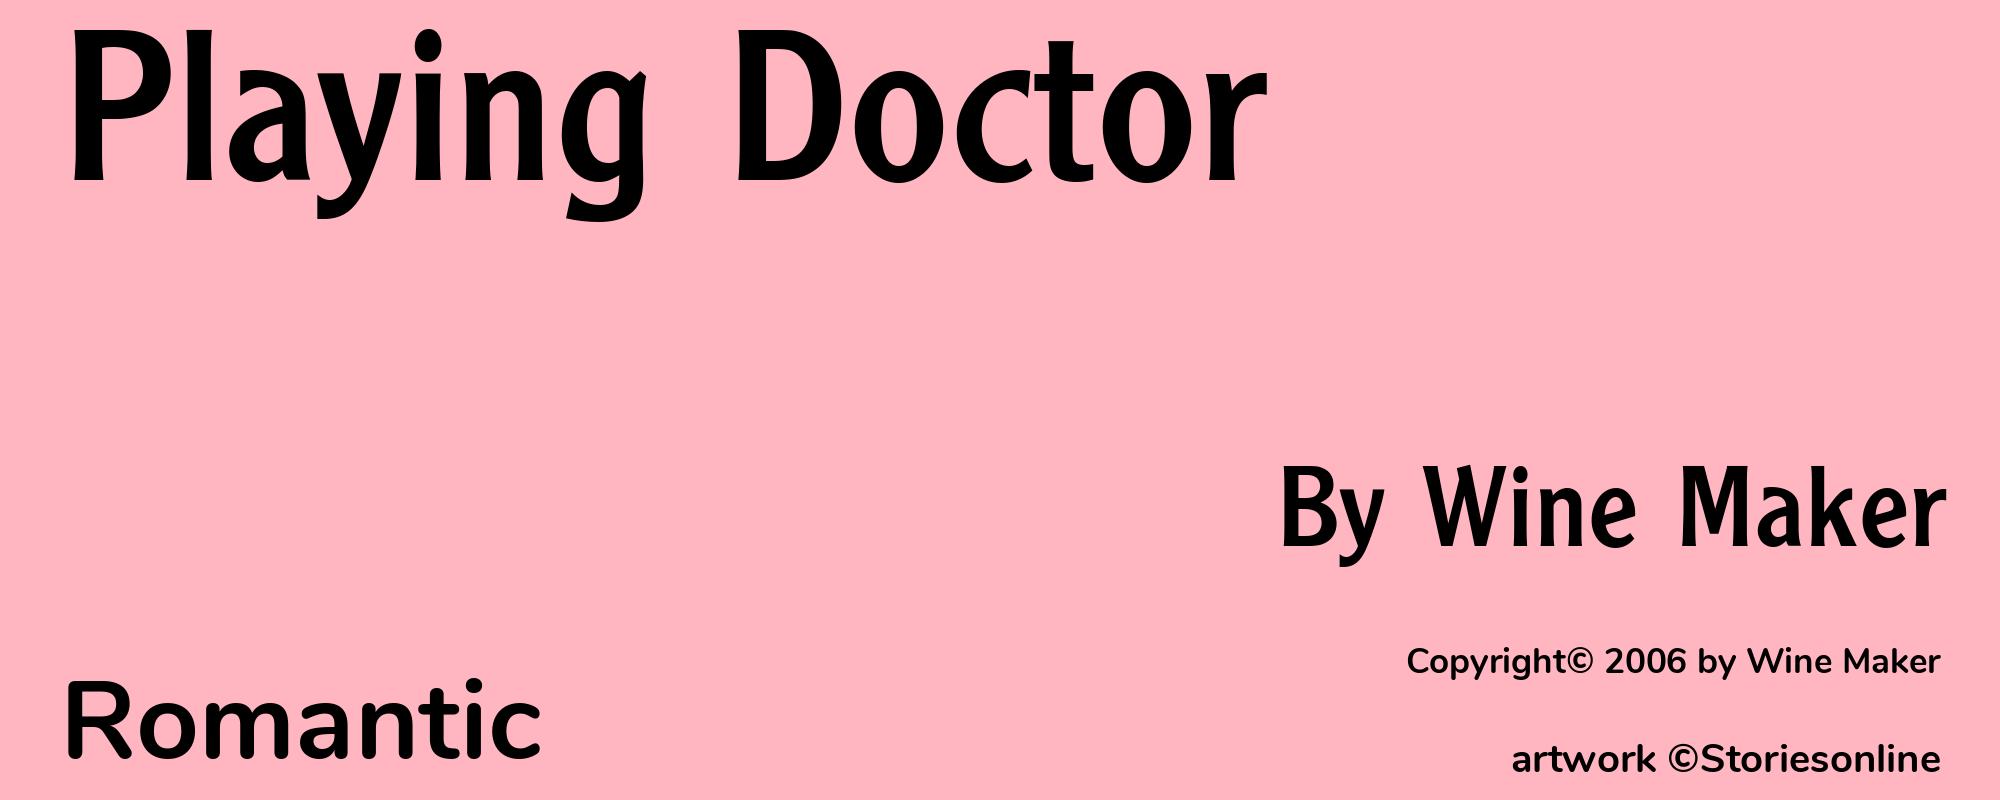 Playing Doctor - Cover